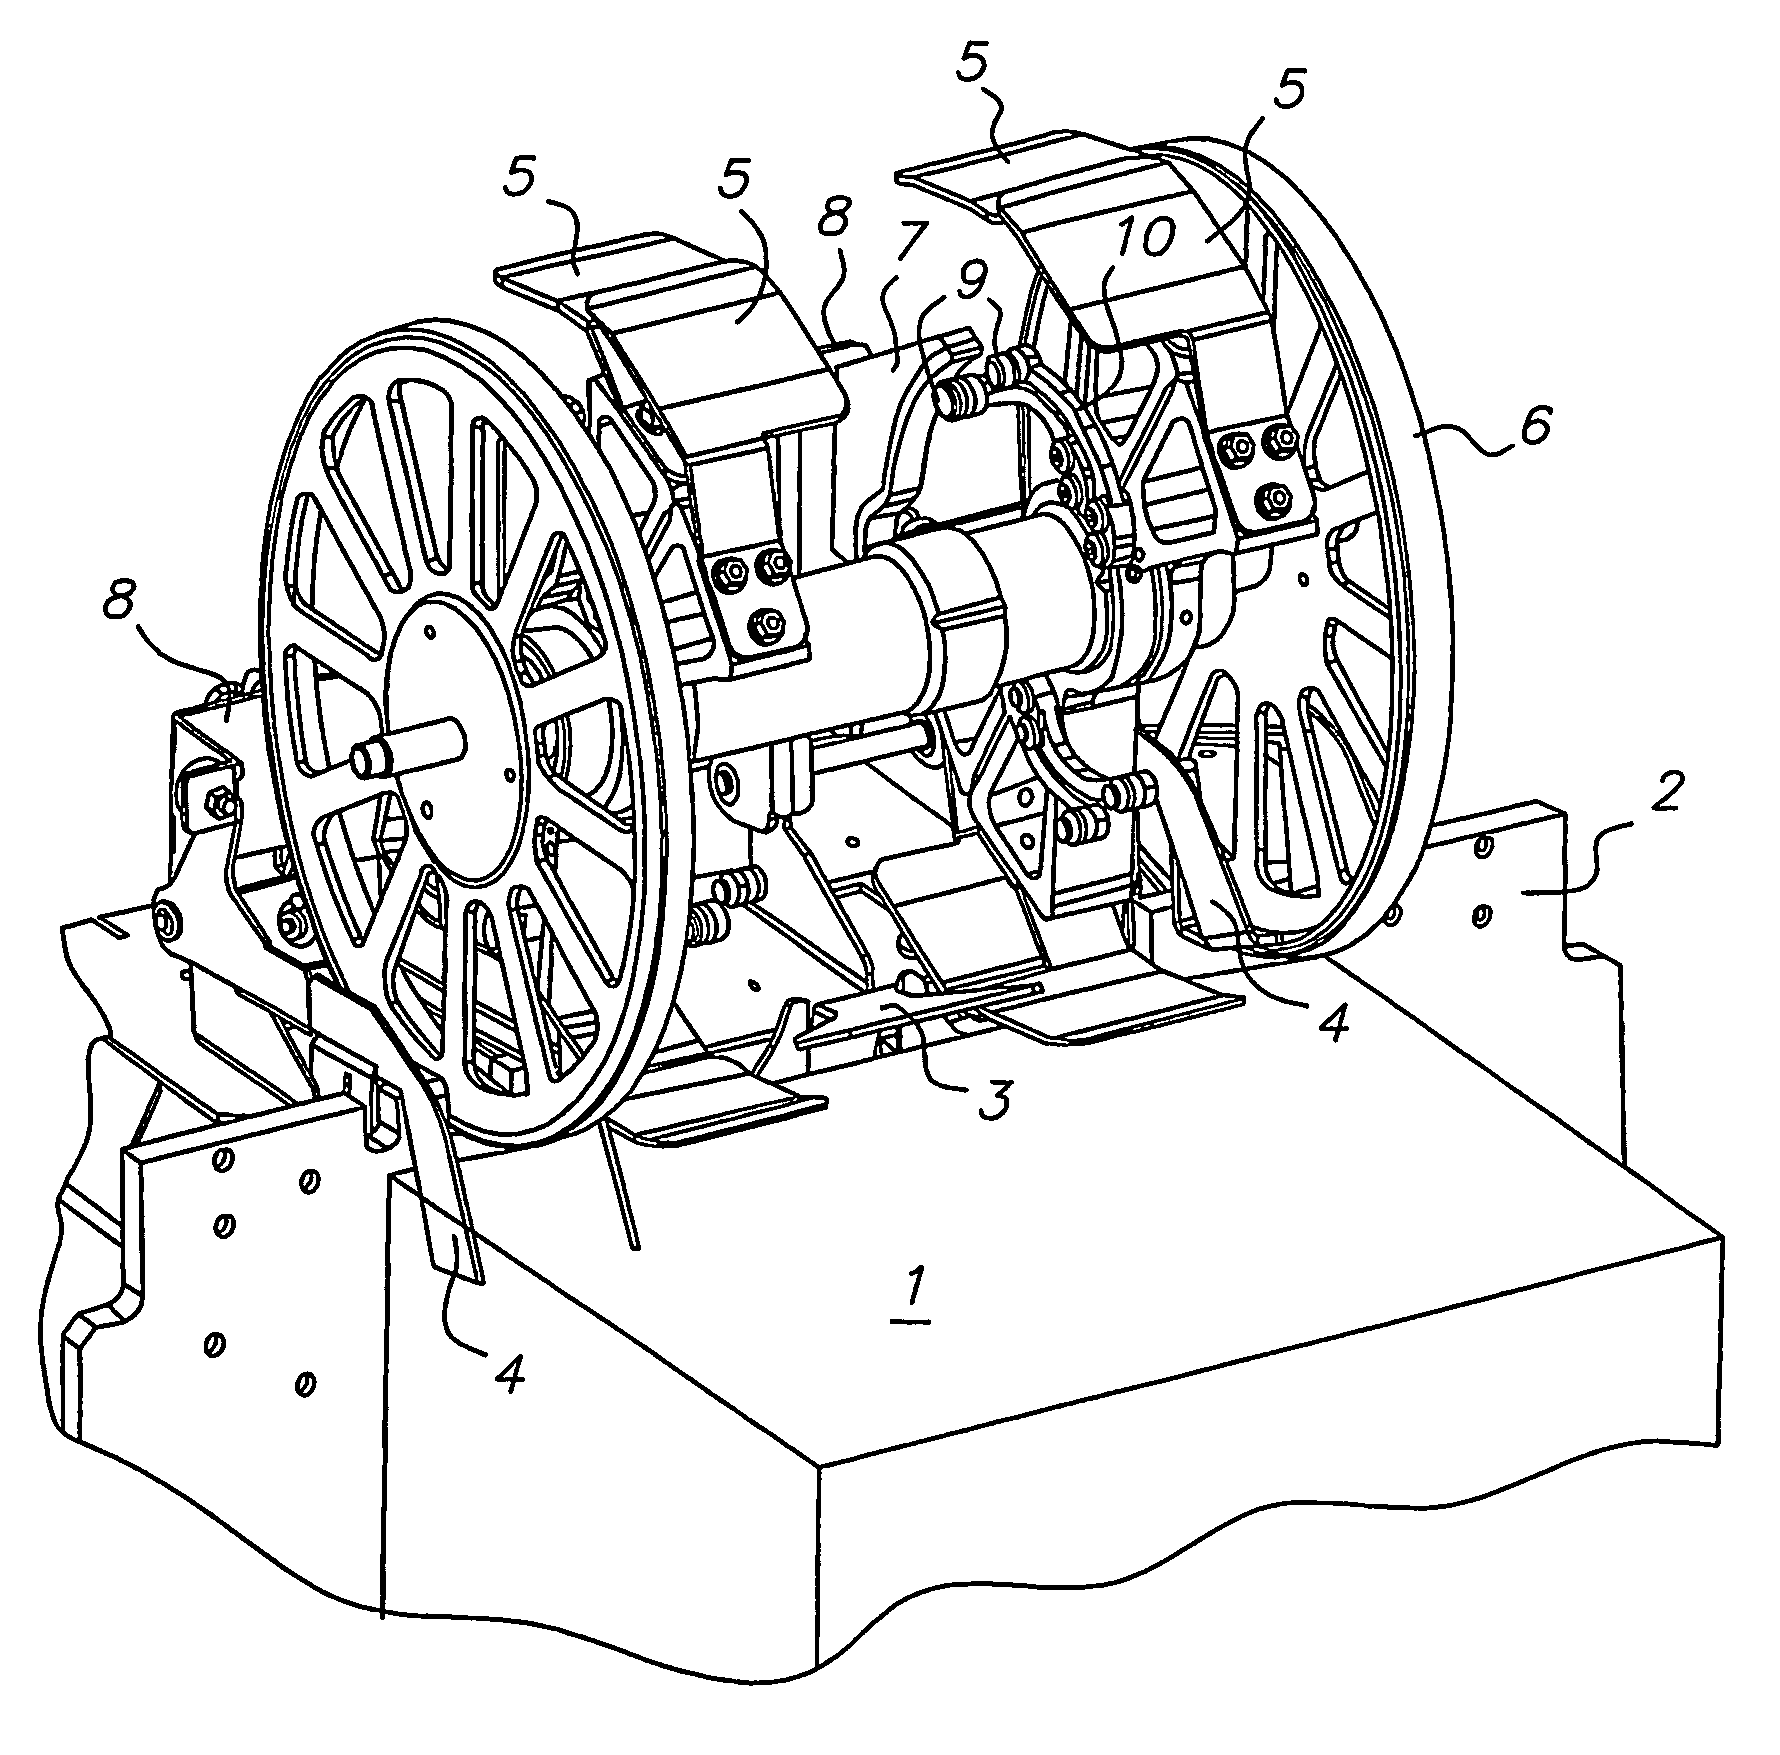 Device for placing sheets for a printer